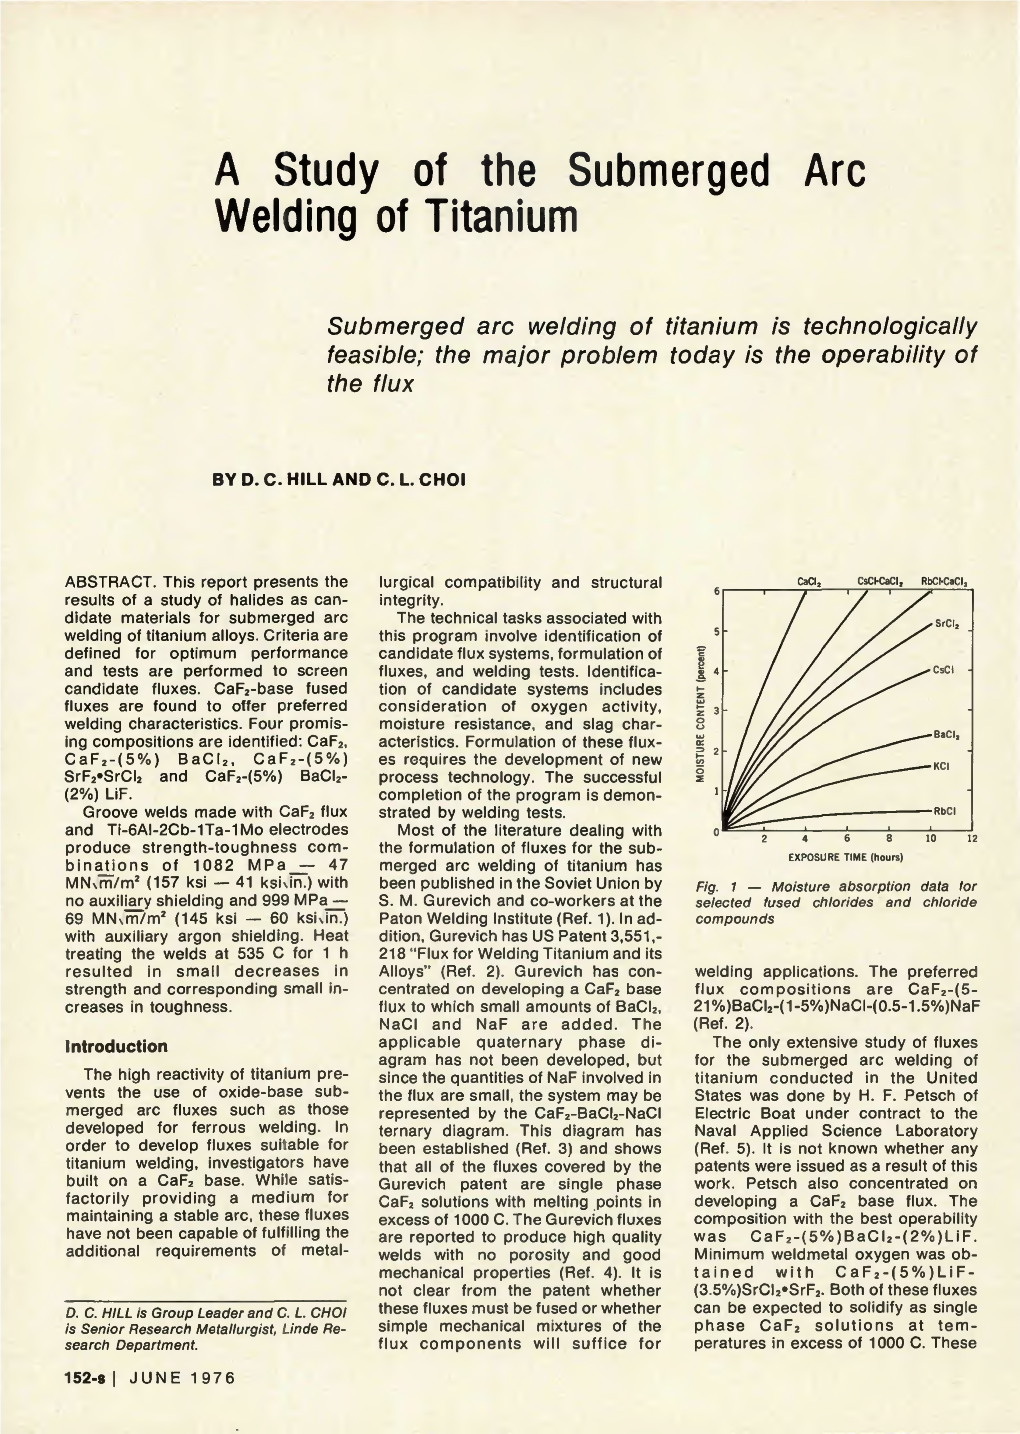 A Study of the Submerged Arc Welding of Titanium